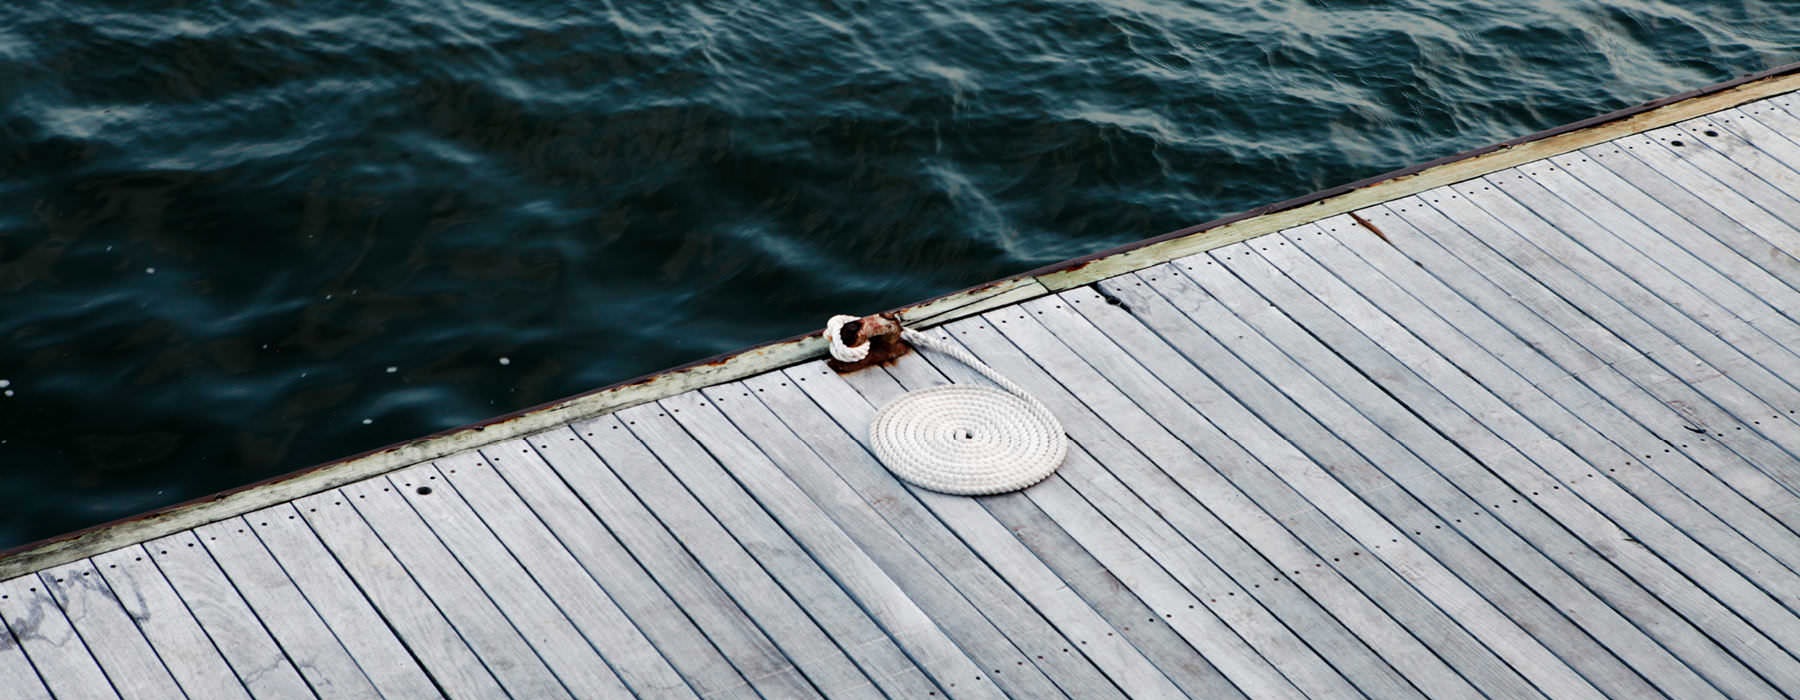 dock with coiled rope